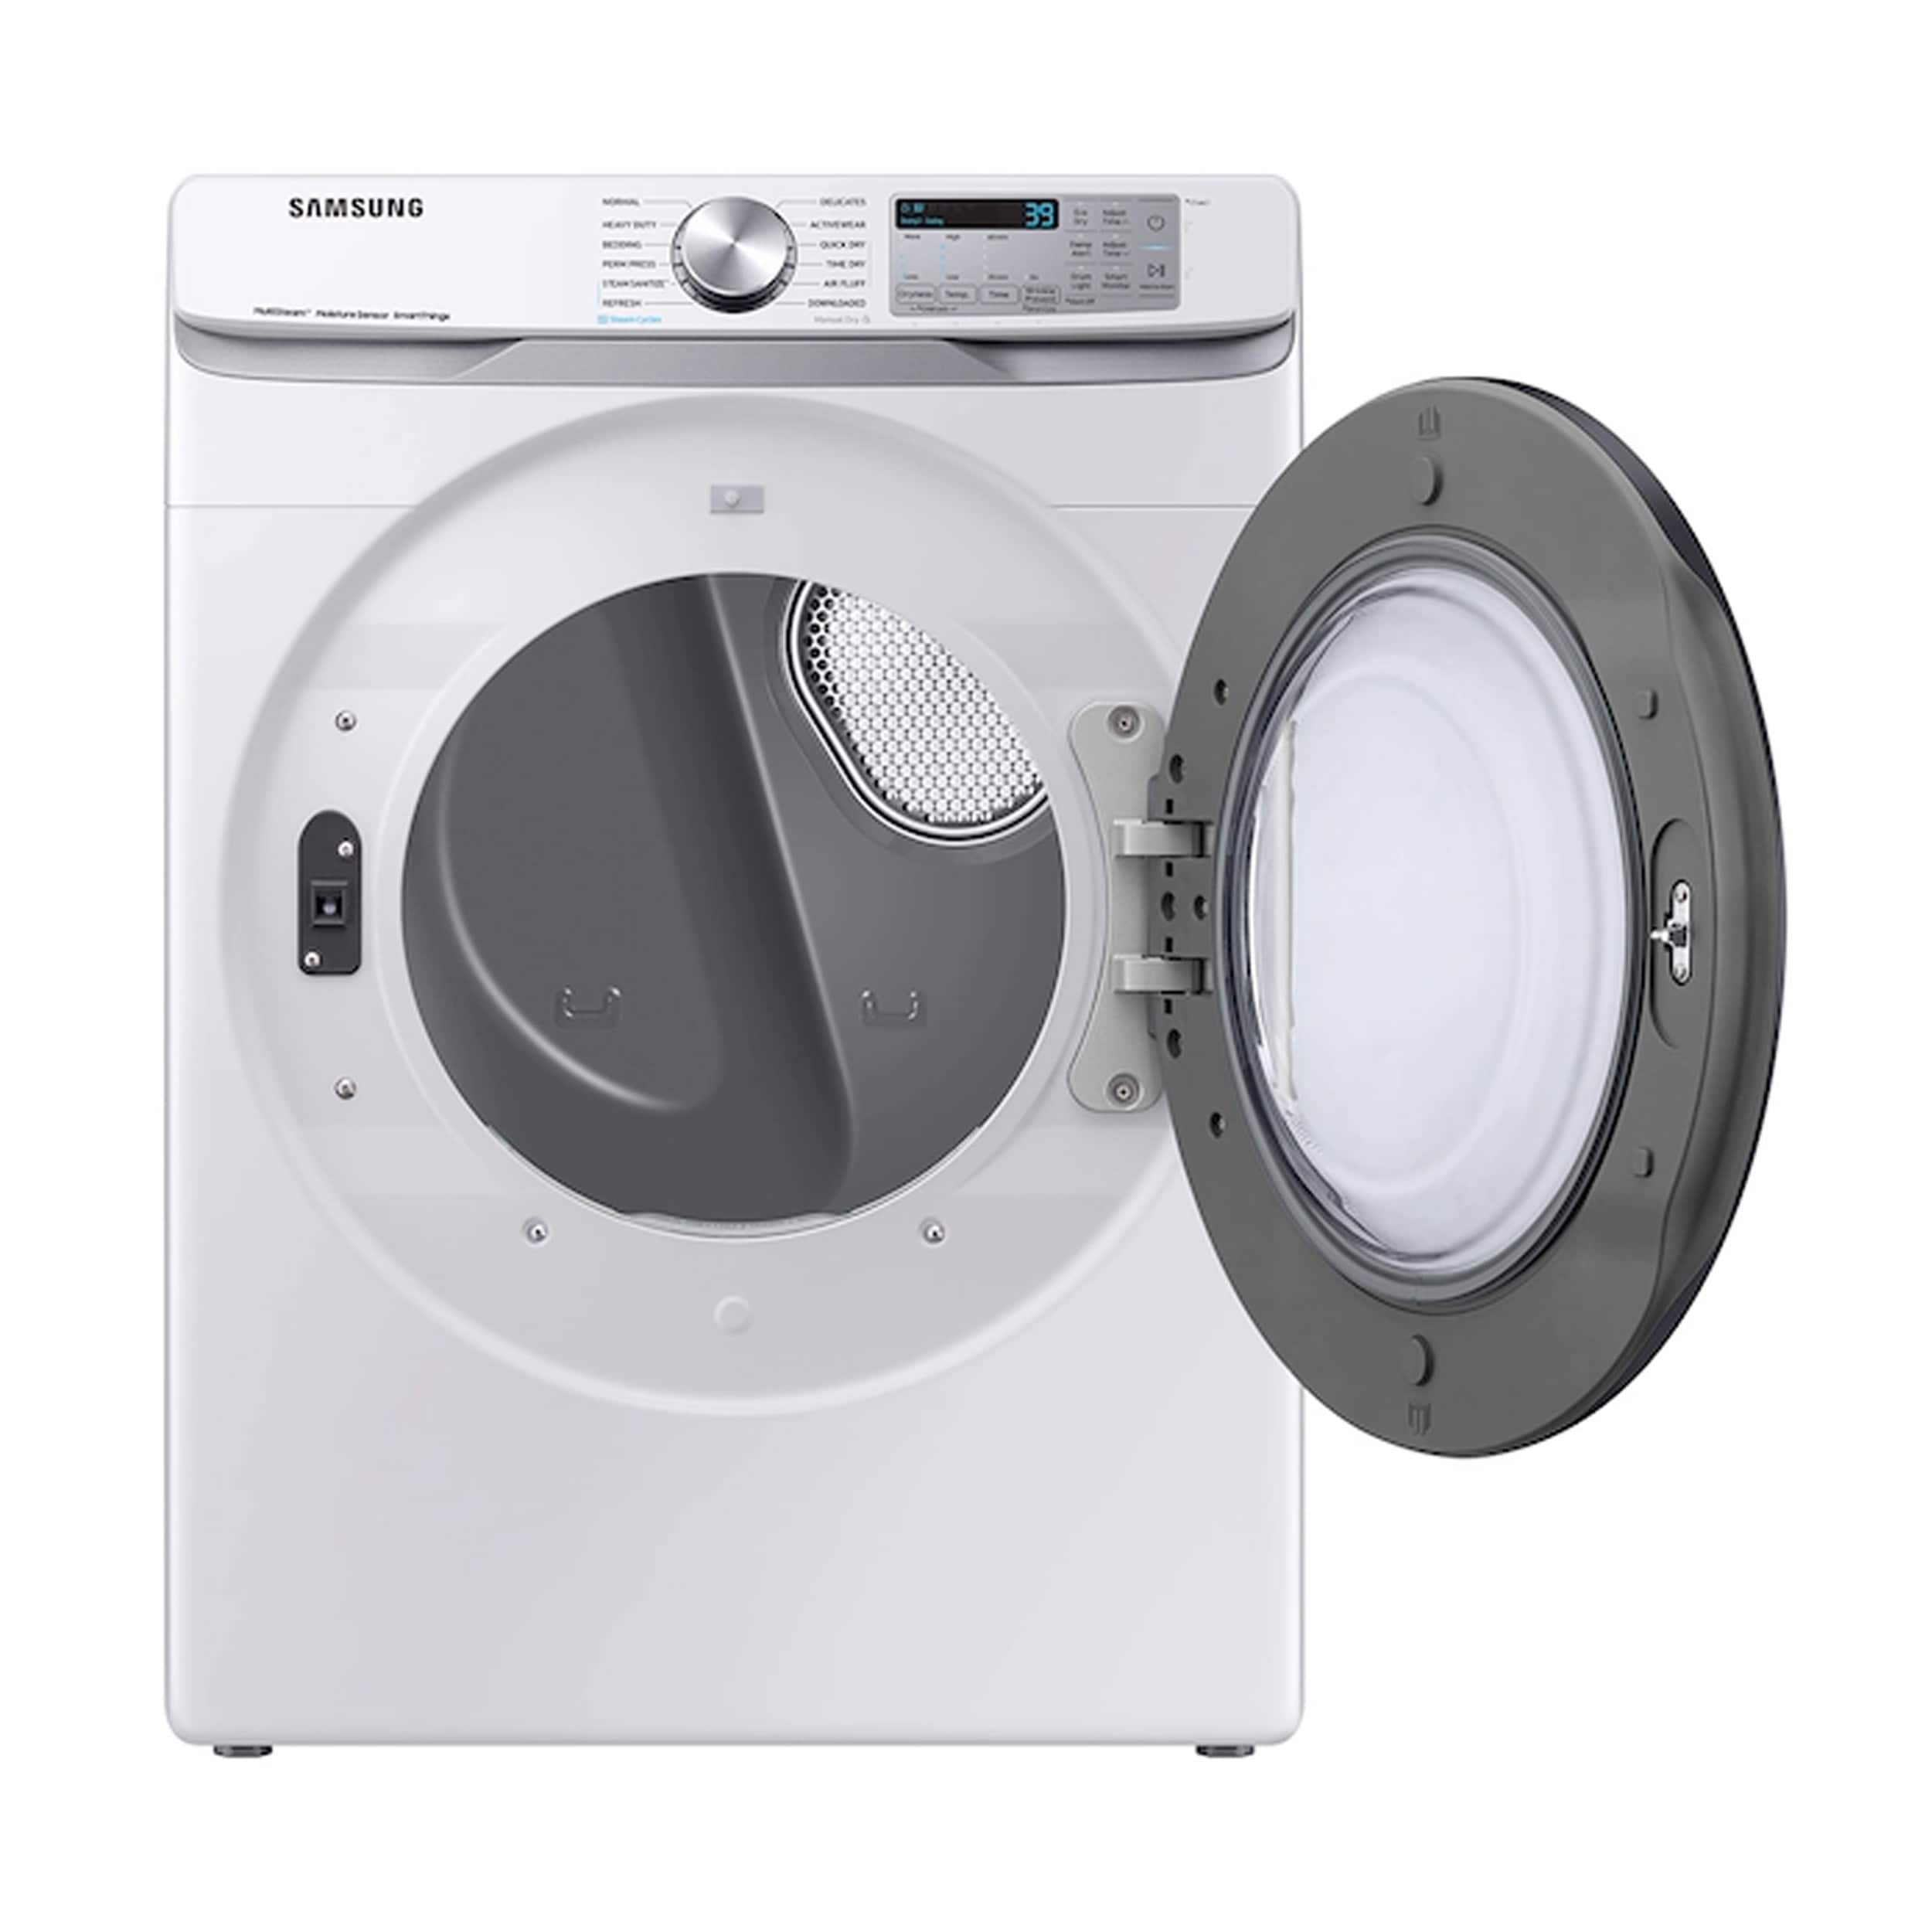 Samsung 7.5 cu. ft. Smart Electric Dryer with Steam Sanitize+ in White